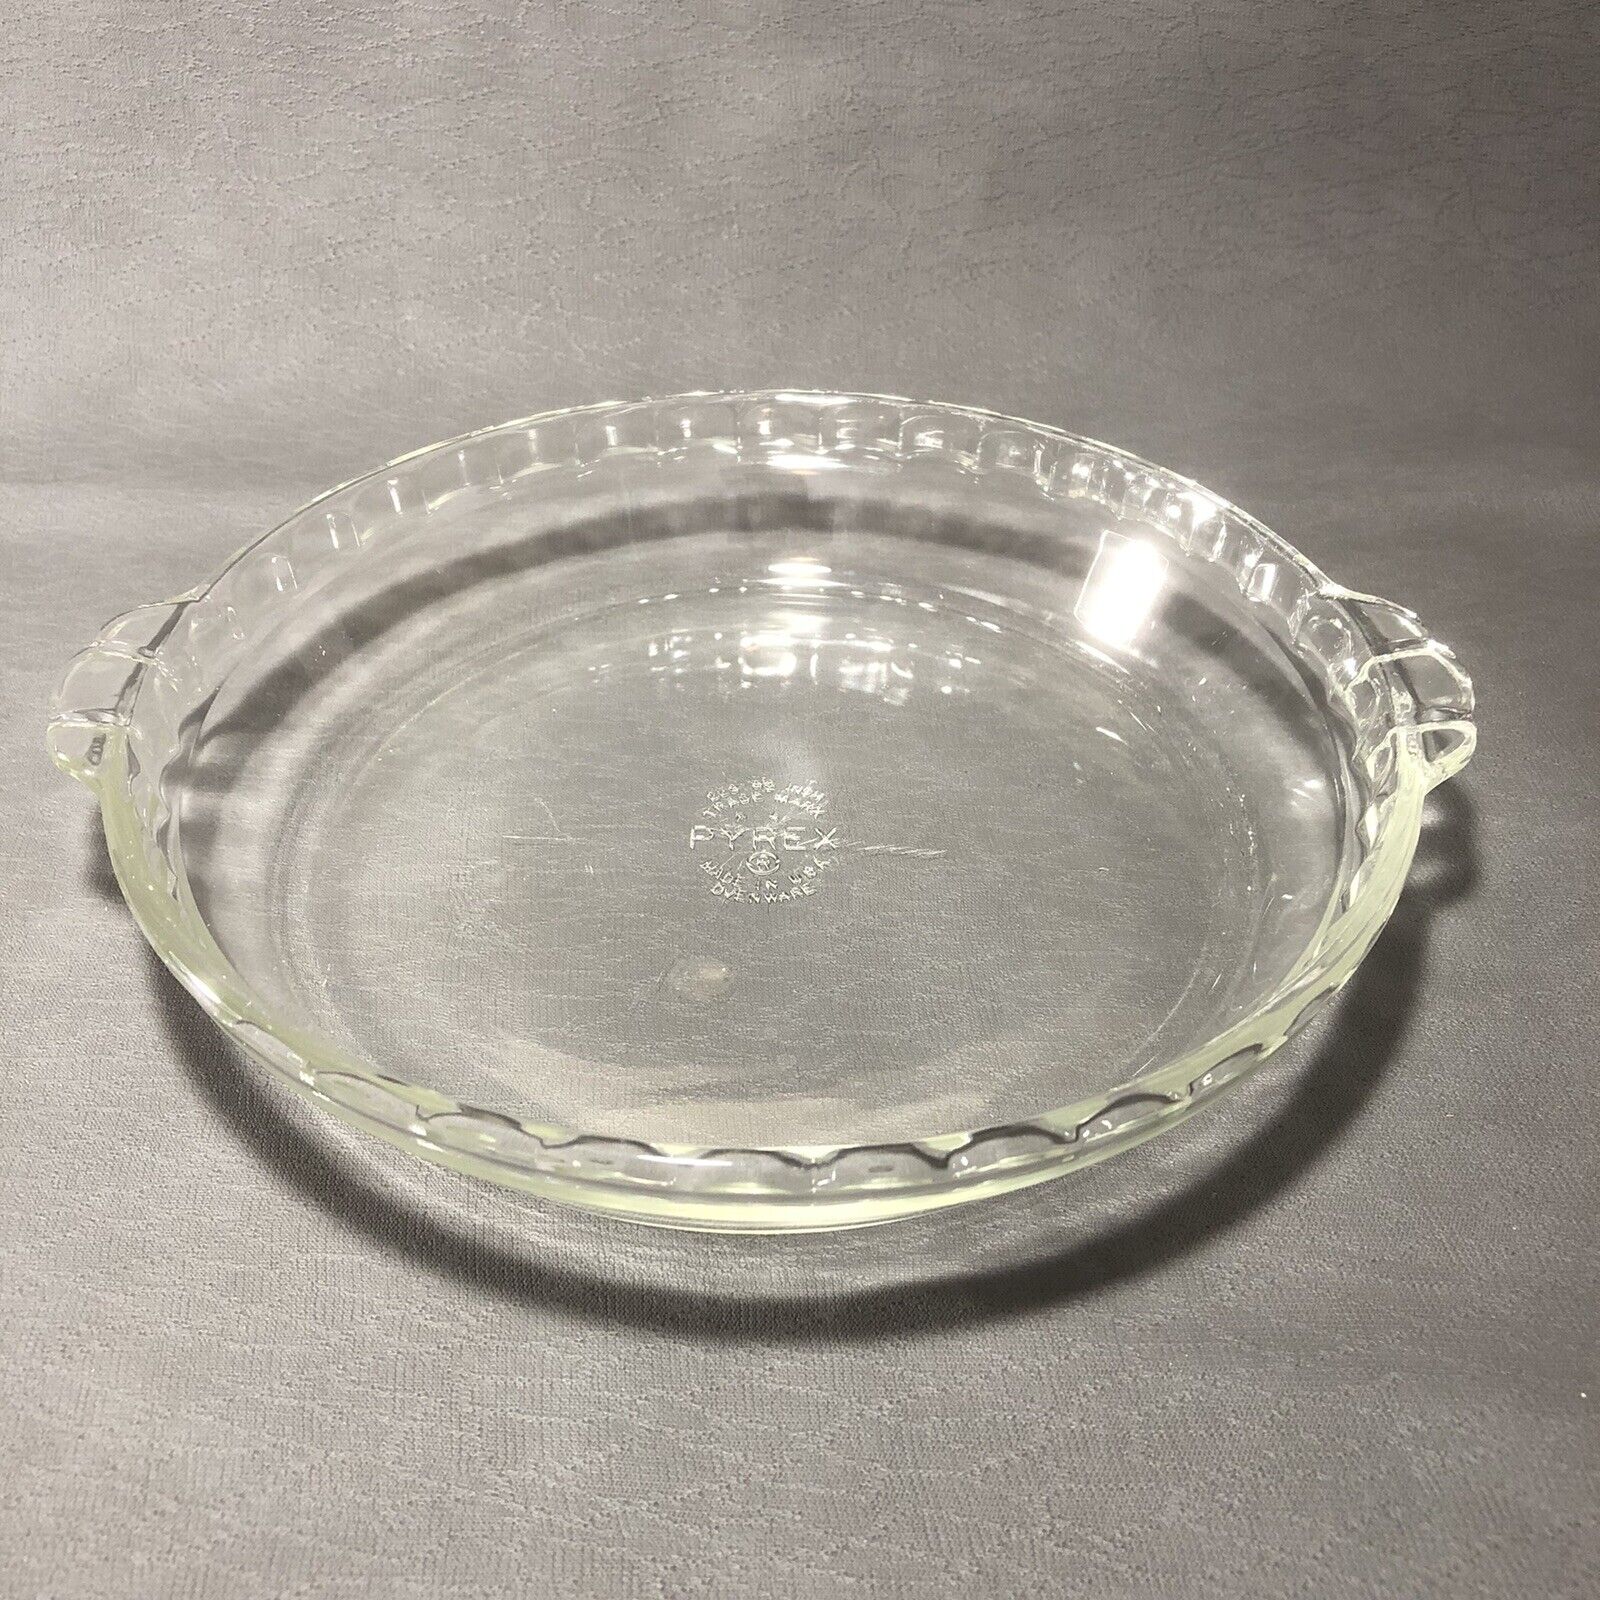 Vintage 1970\'s Pyrex Clear Glass Pie Dish #229 w/ Fluted Edge and Handles 9.5\